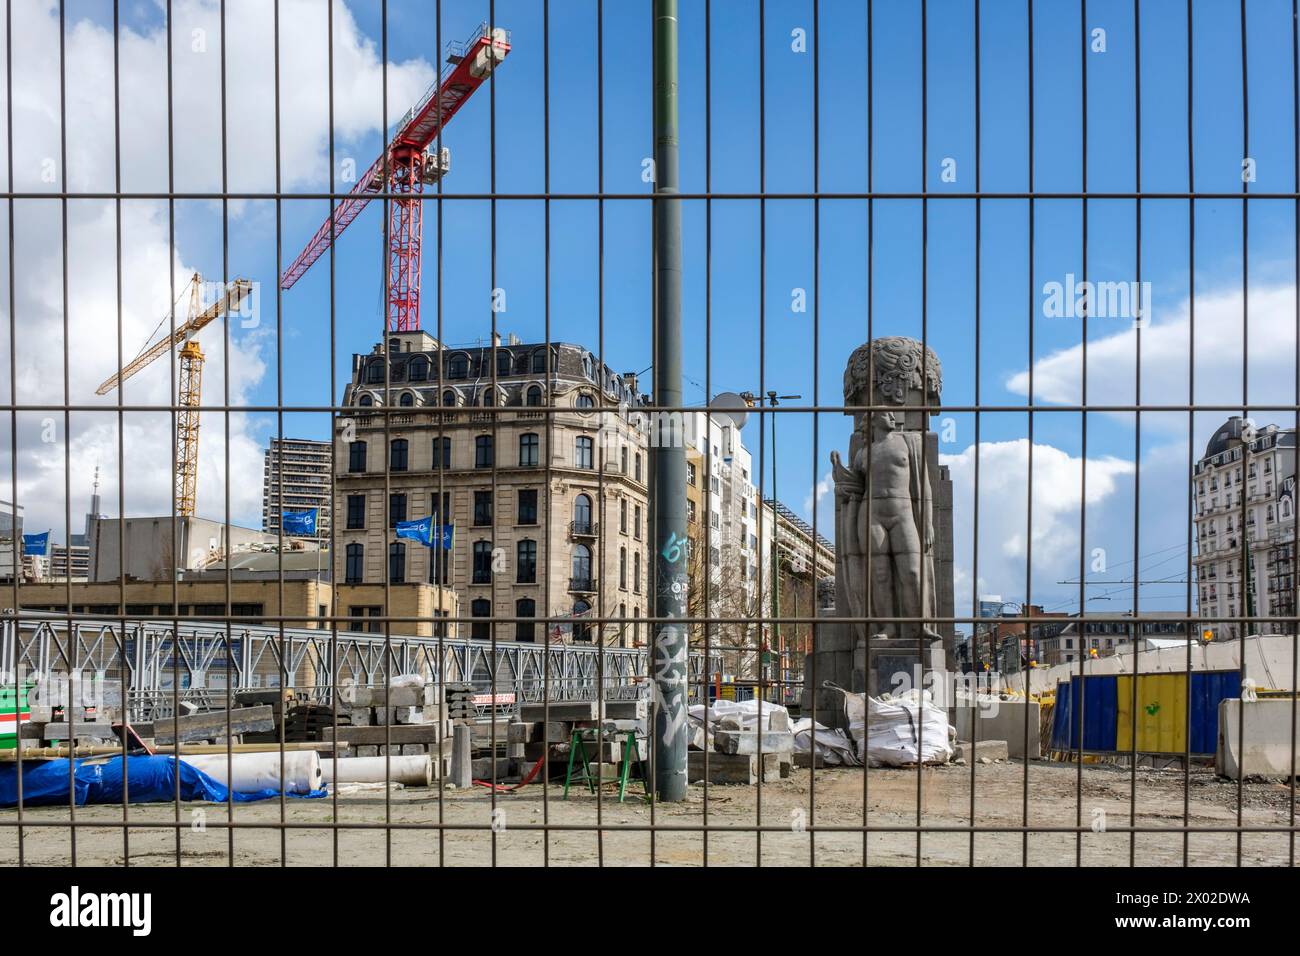 Cranes at work on a building site near the Place des armateurs and the Vergote basin on the Brussels Canal - Metallic fence to protect from intrusion Stock Photo